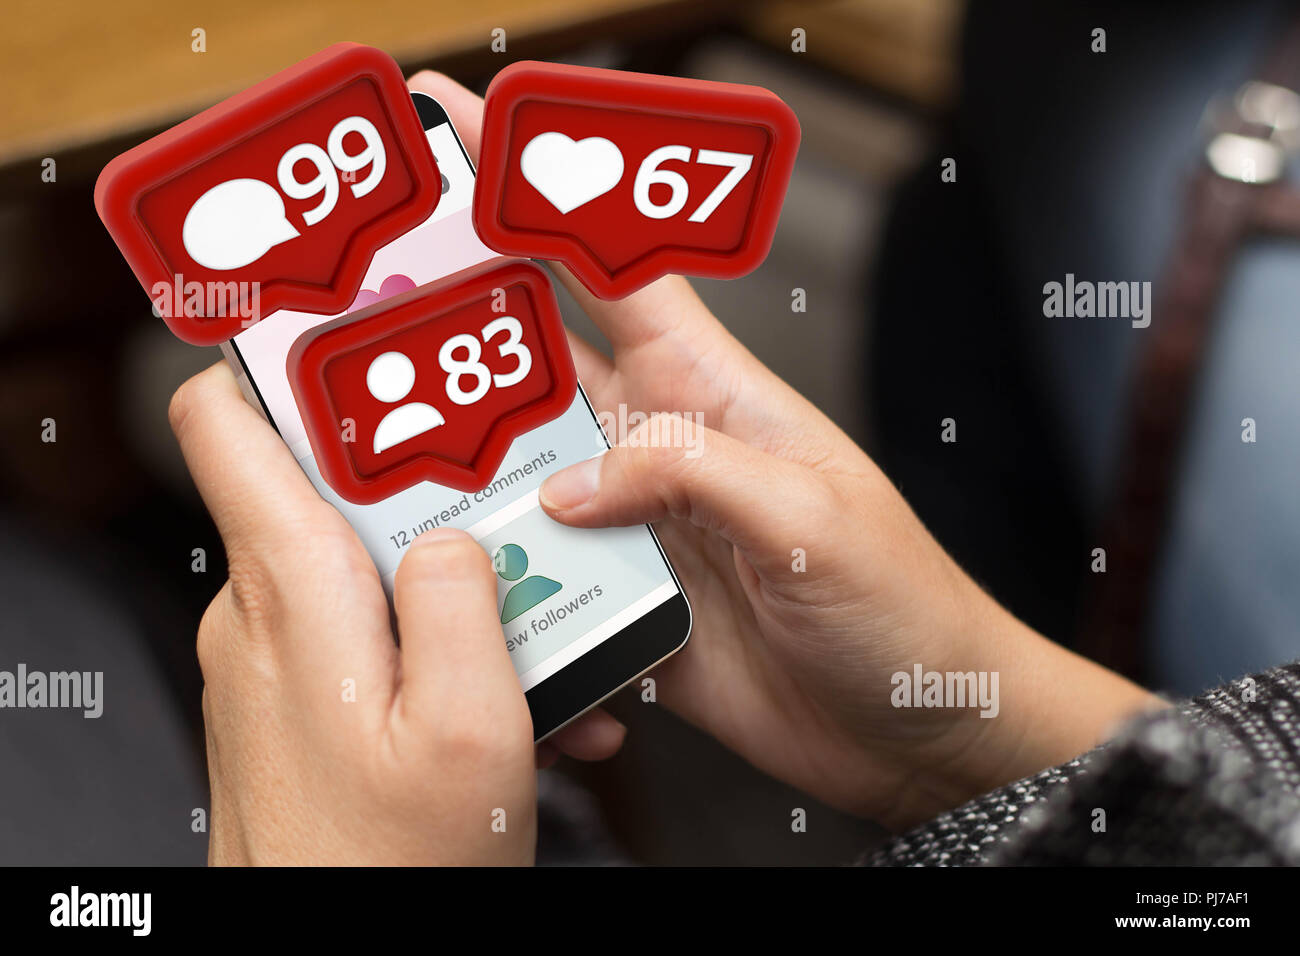 girl using a digital generated phone with social media notifications. All screen graphics are made up. Stock Photo